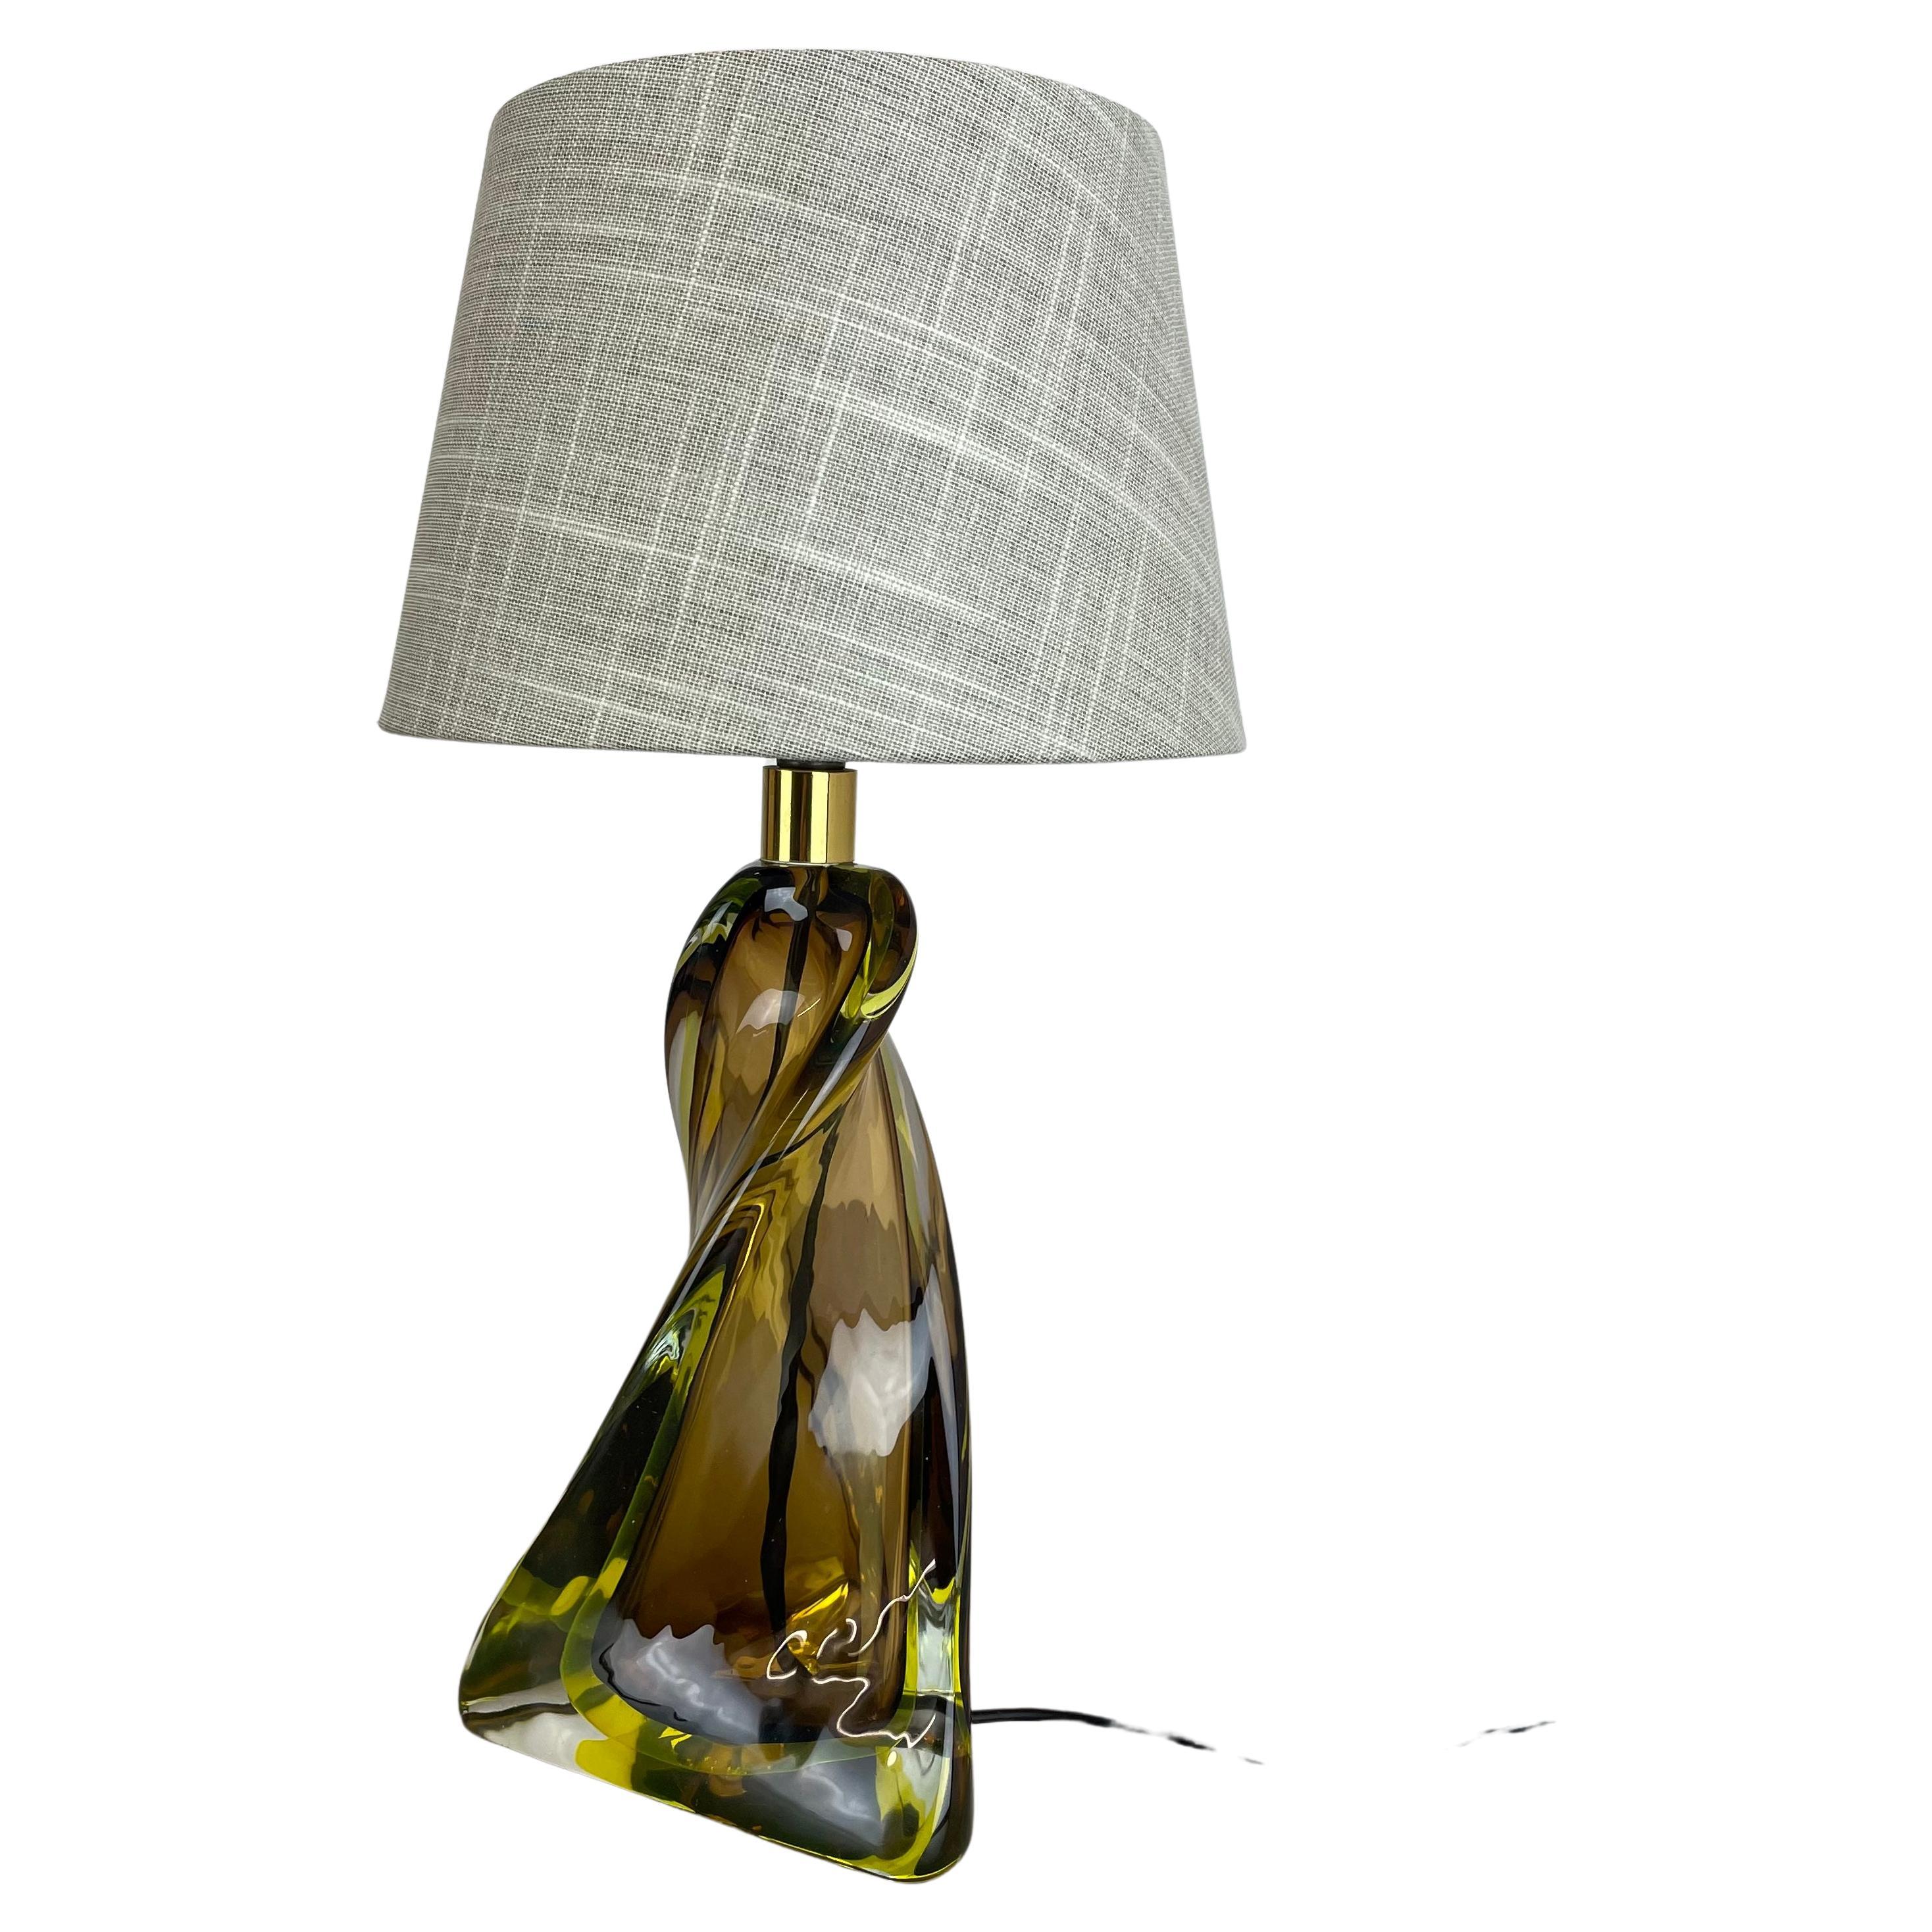 Article:

table light desk top light


Origina:

Murano, Italy


Age:

1960s




Description:


This fantastic vintage table light base was designed and produced in the 1960s in Murano, Italy. The light base is made of high